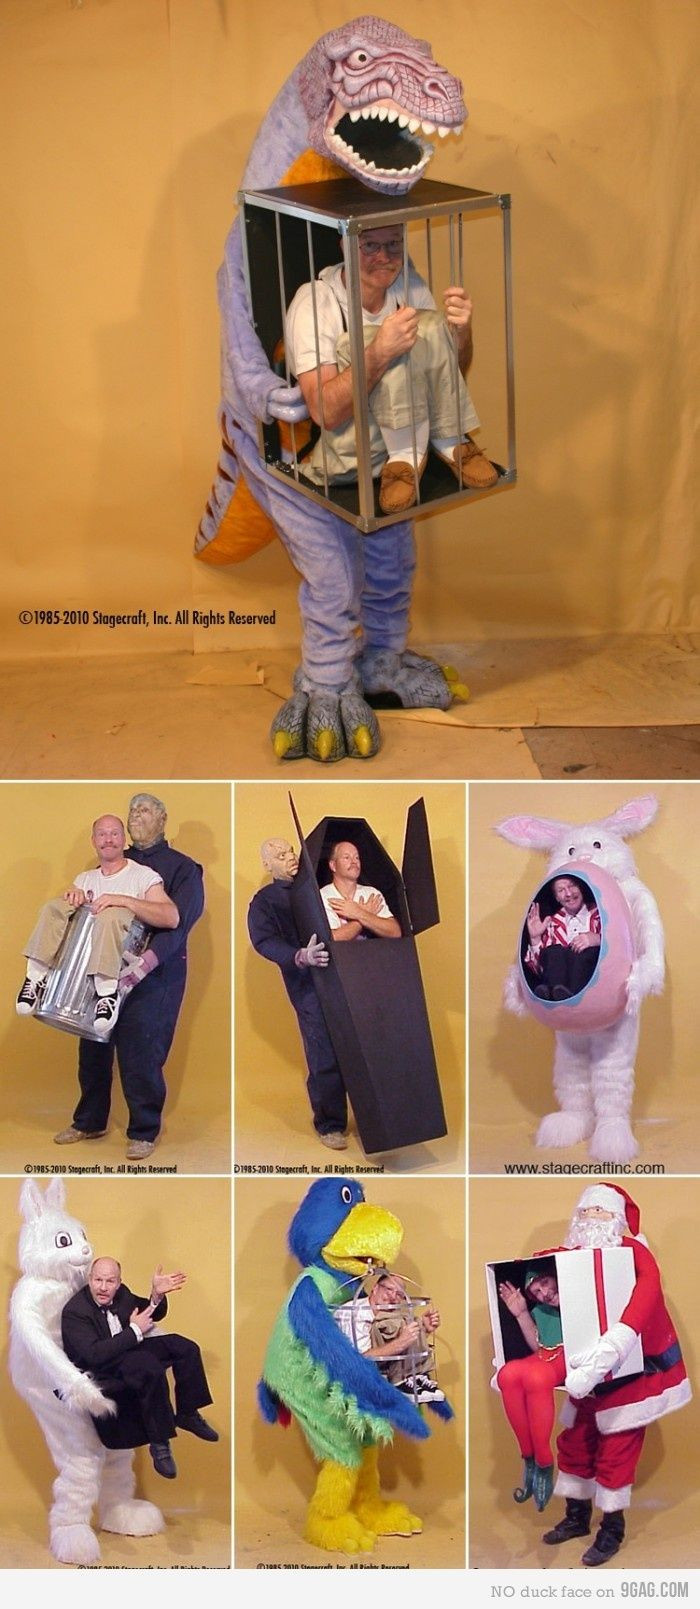 Funny Costumes DIY
 25 best ideas about Funny adult costumes on Pinterest